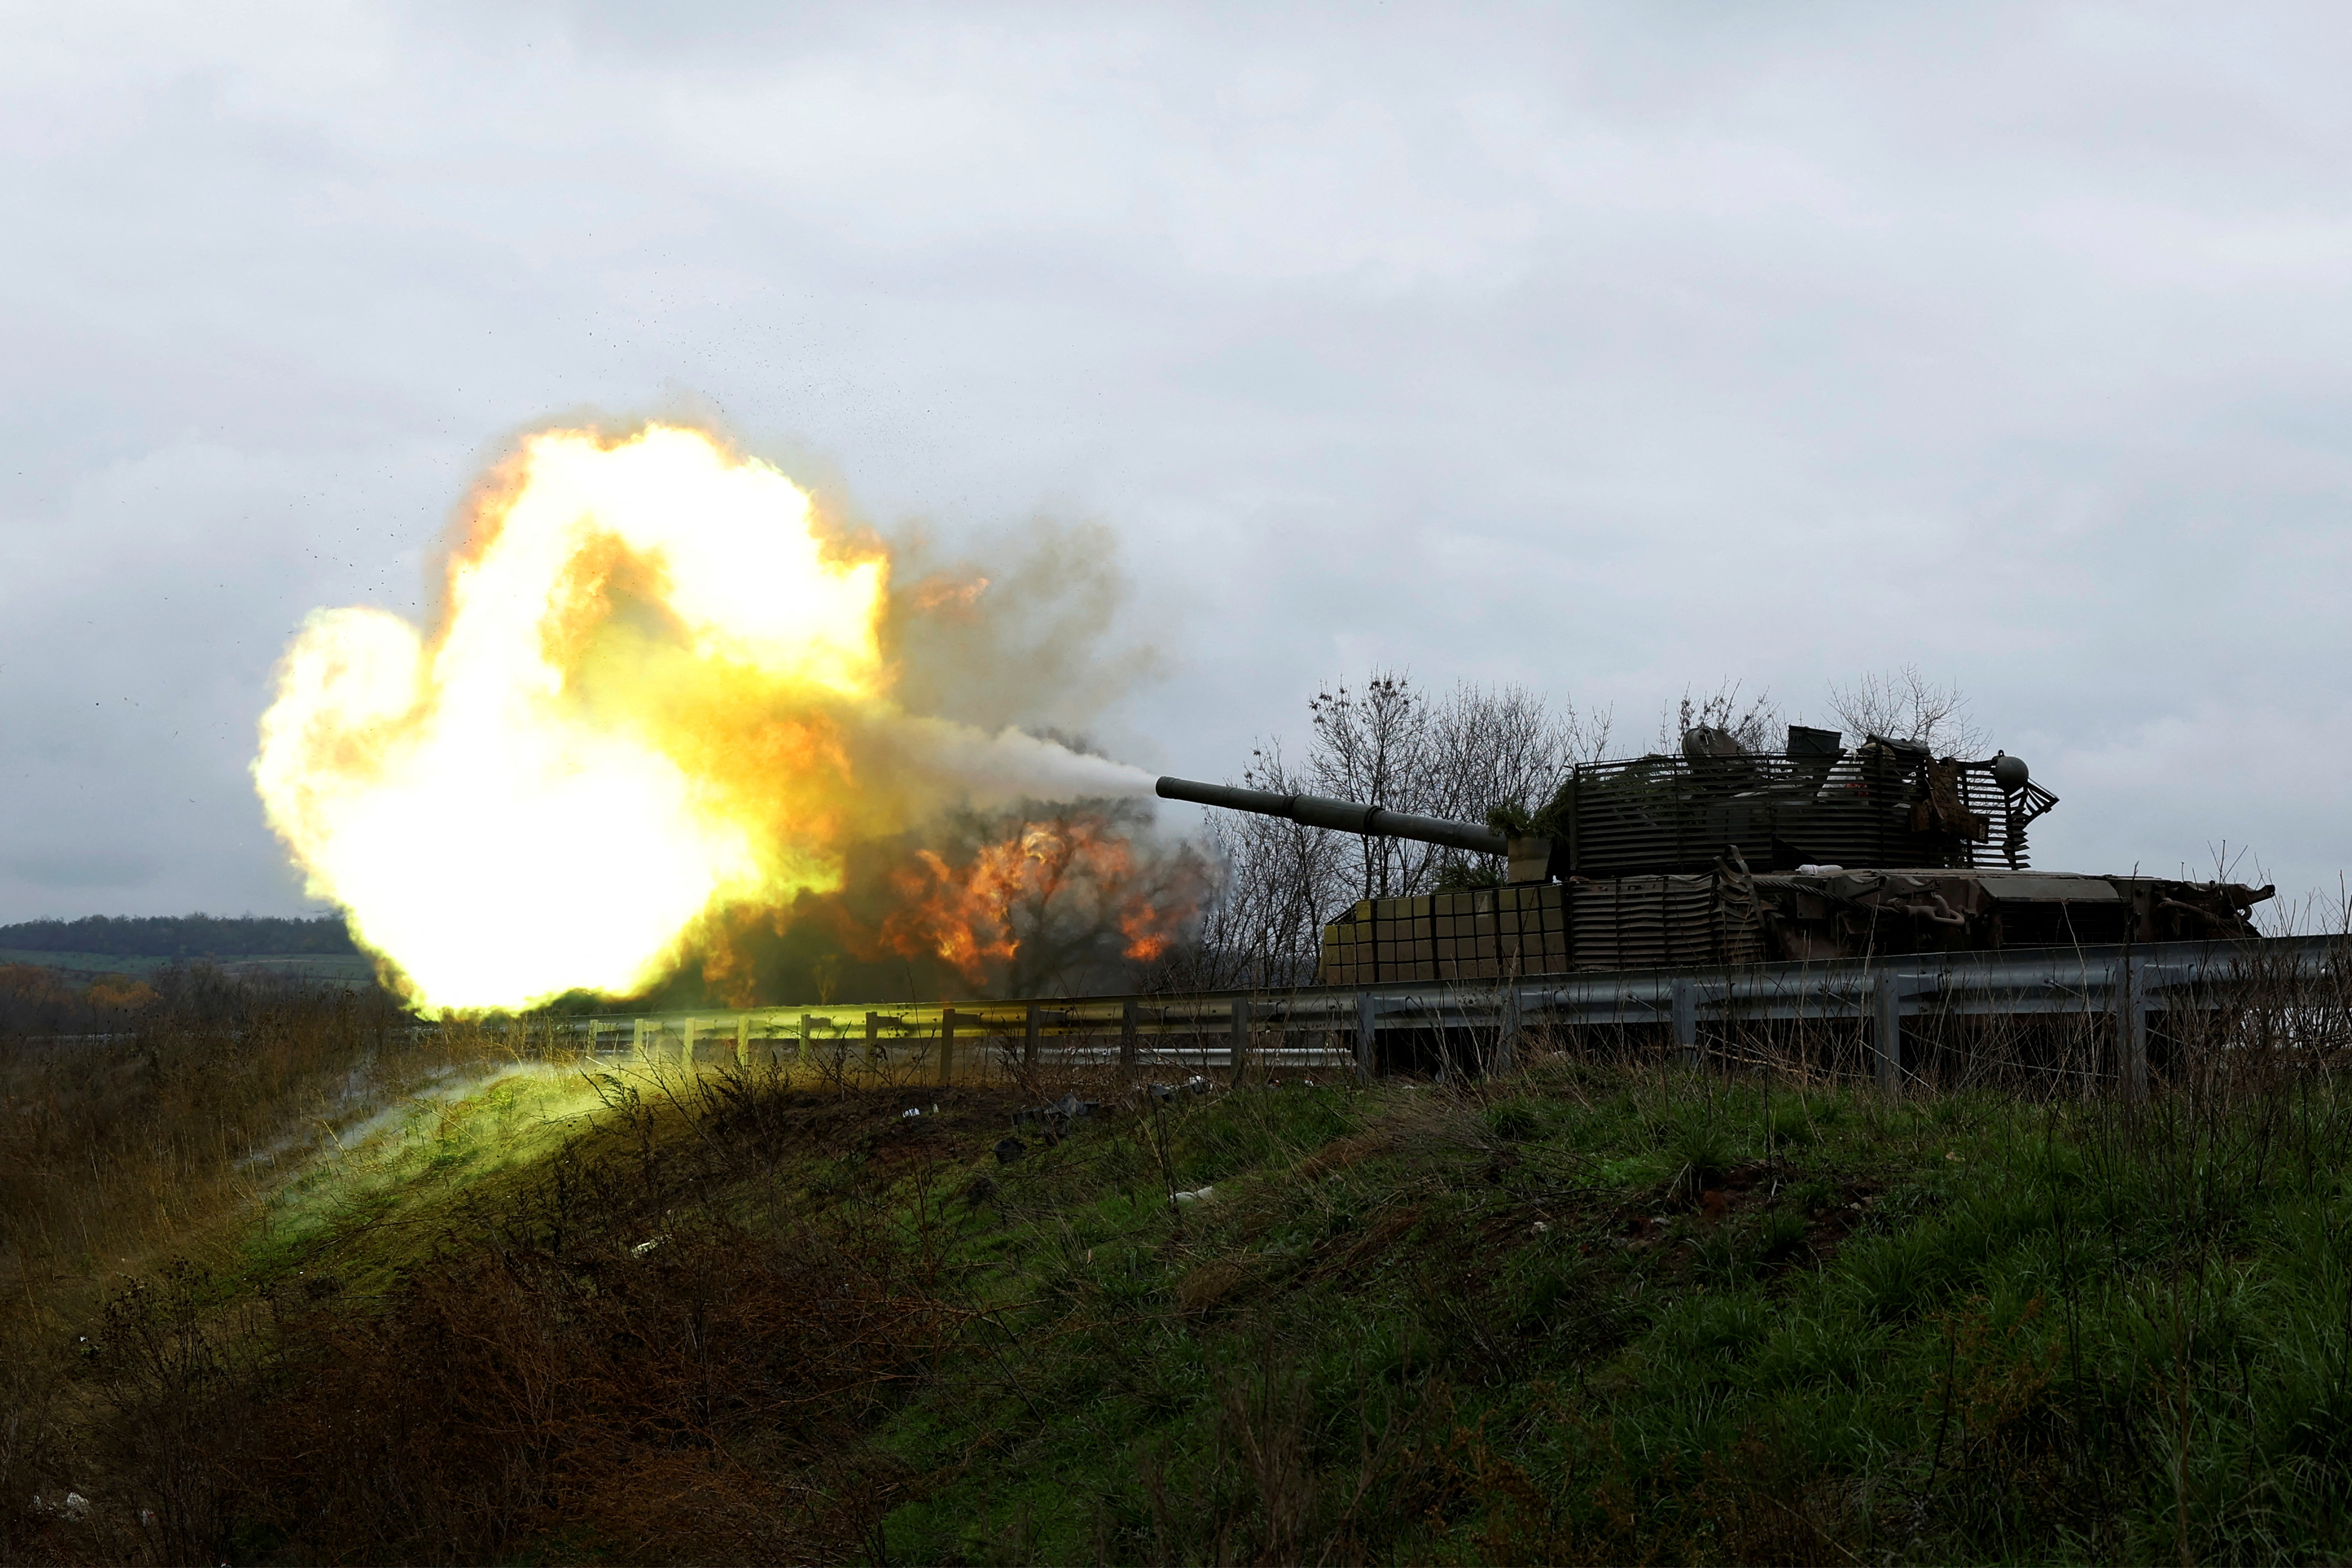 Ukrainian soldiers fire a round from a tank on the frontline in eastern Donbas region of Bakhmut on Friday. The tank was captured during a battle against Russian forces in March.